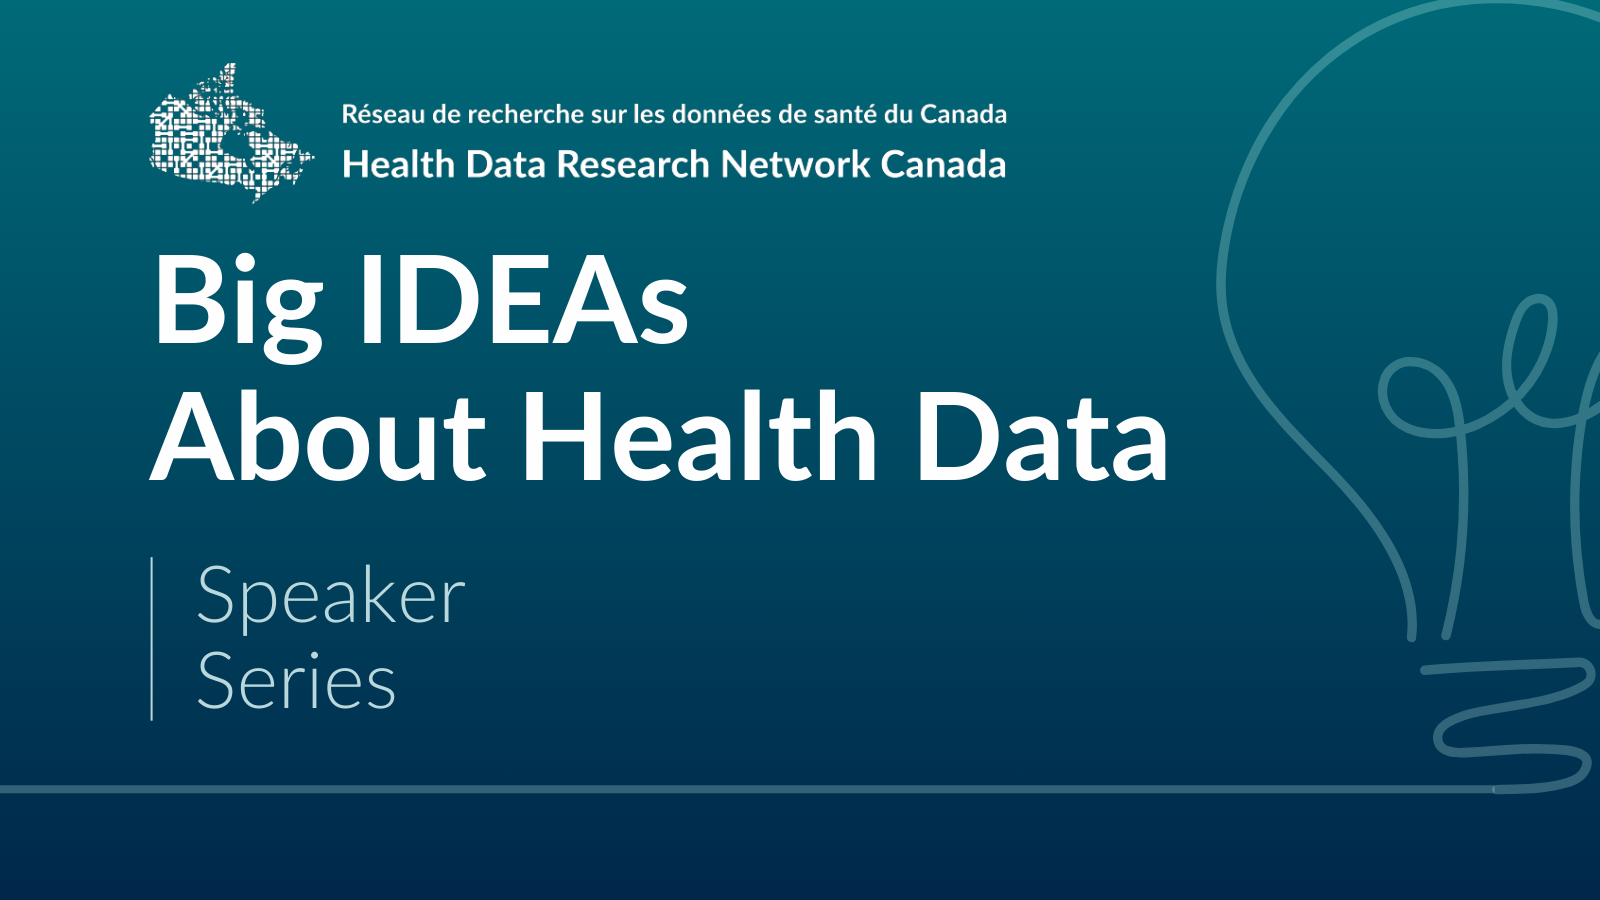 No significant visuals. White text on a dark green background reads: Big Ideas about health data webinar series. The logo for Health Data Research Network Canada ais at top left.